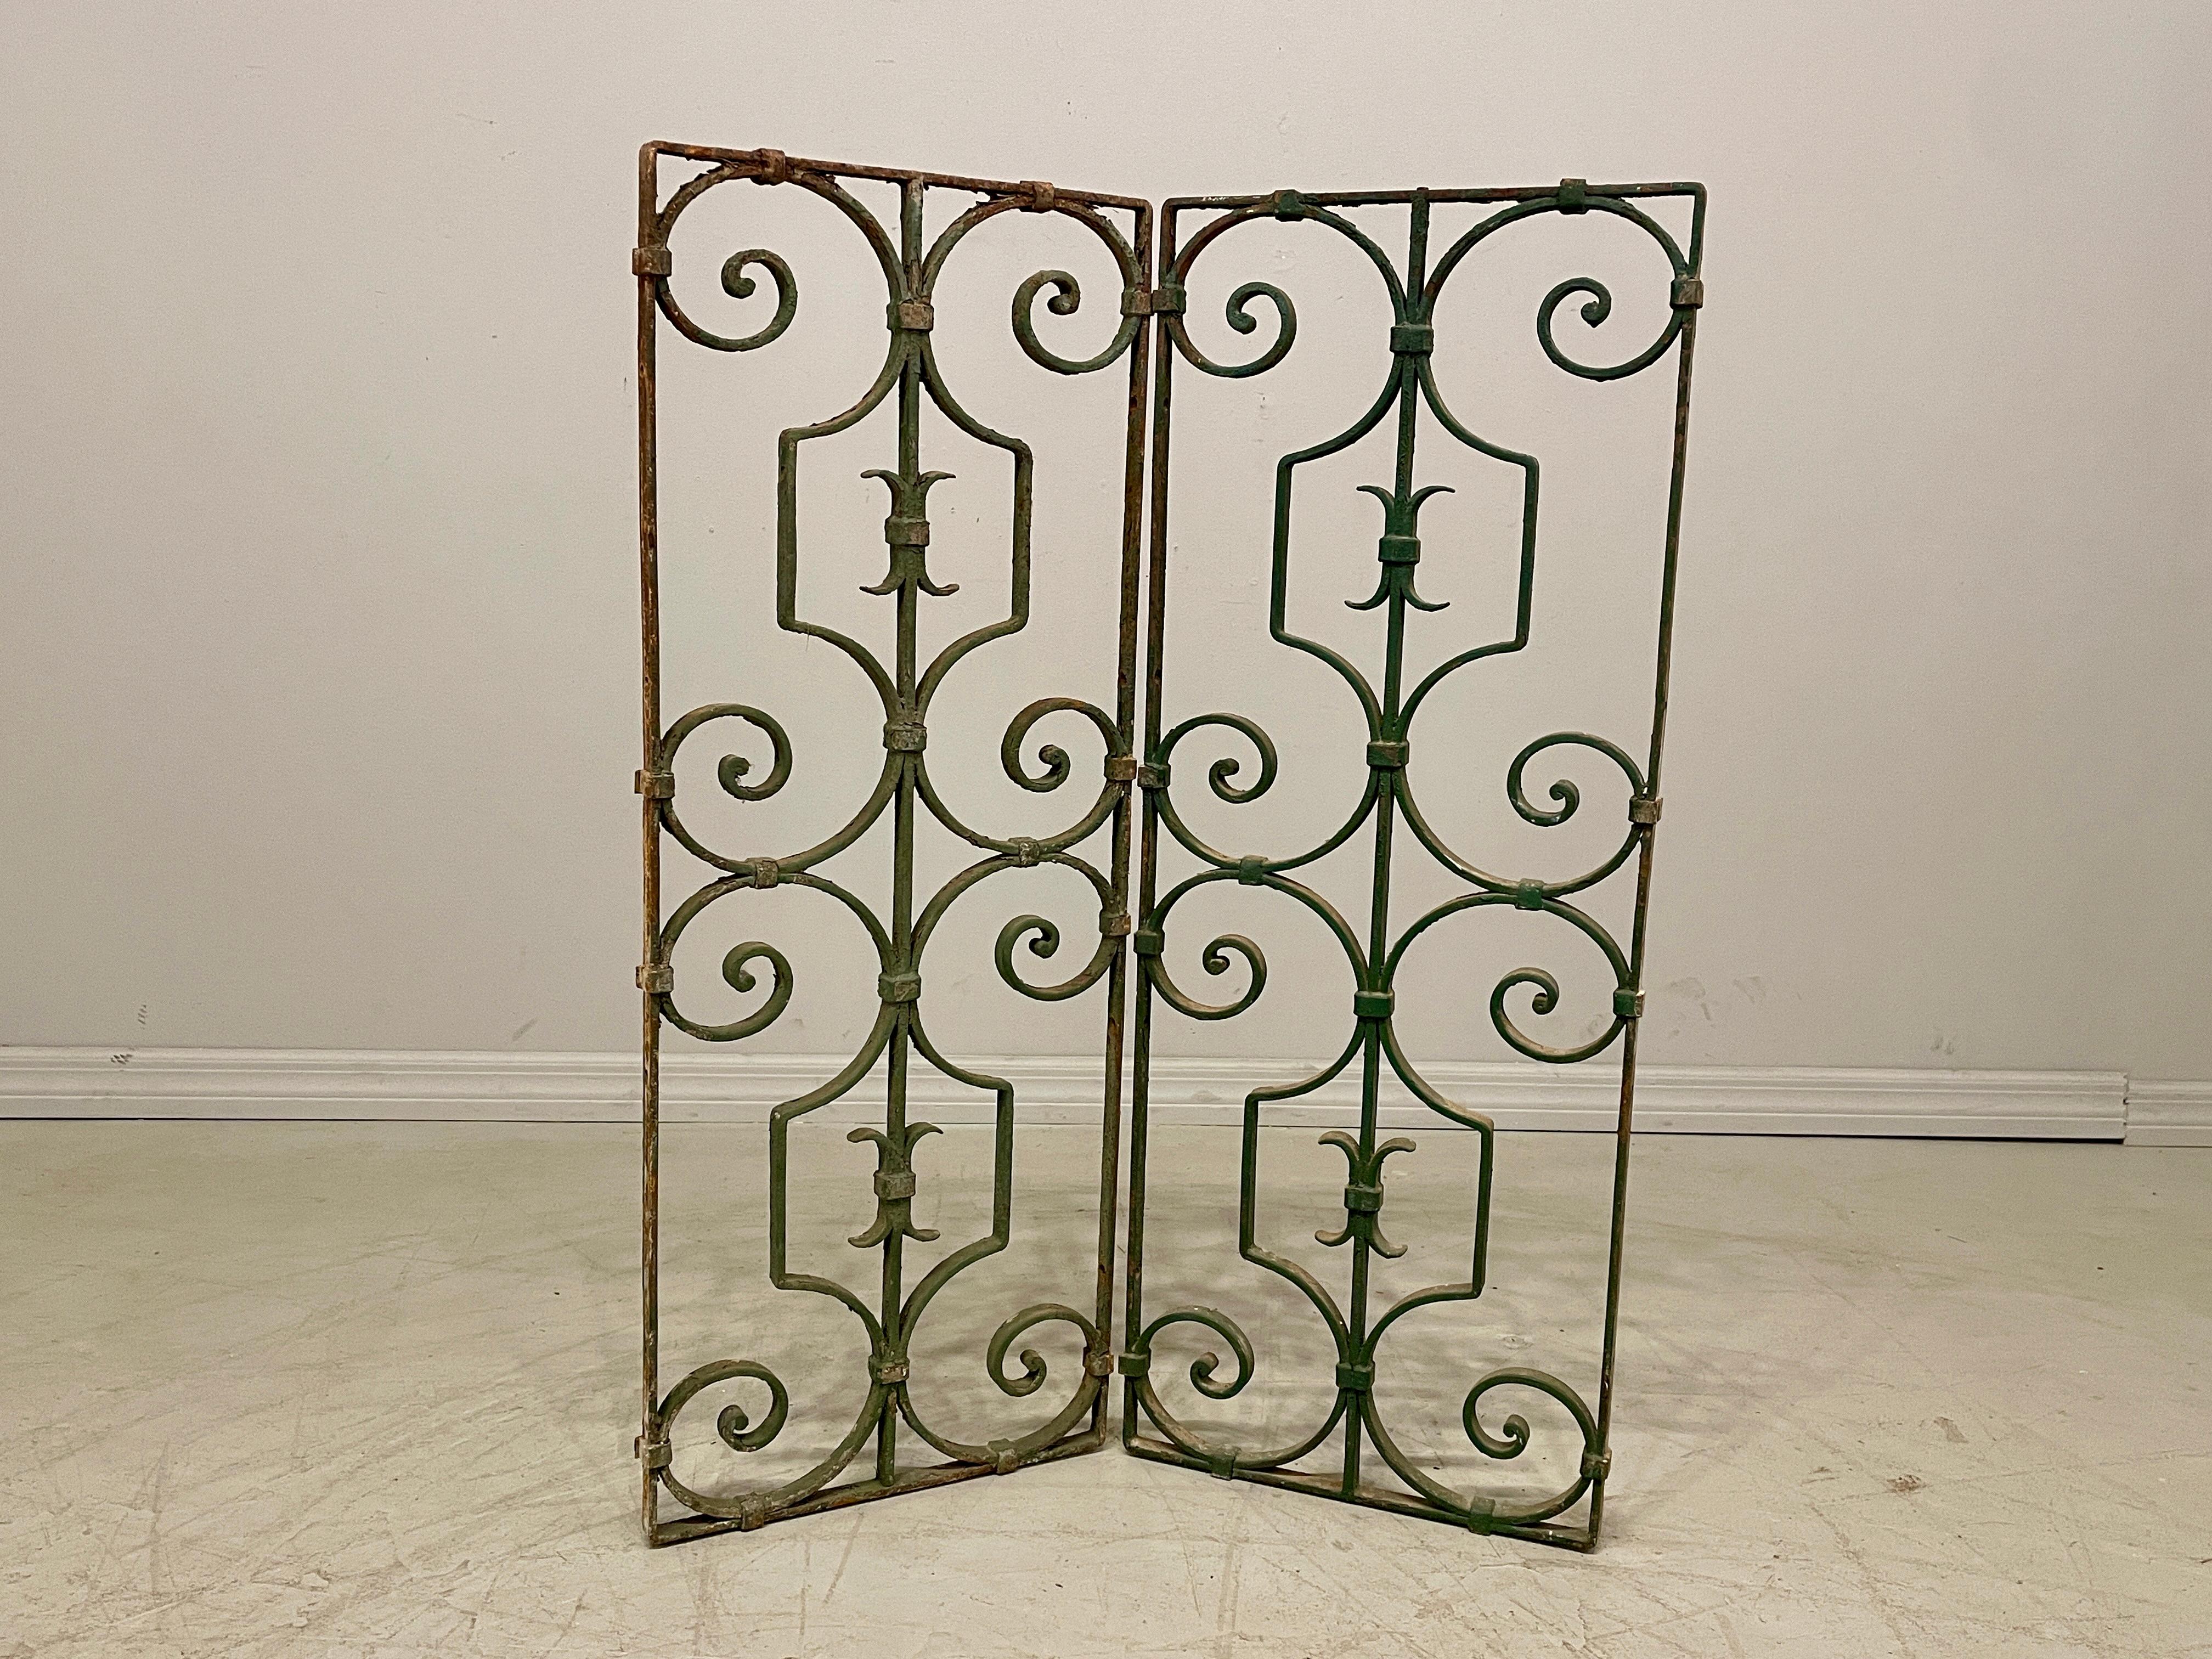 A pair of French wrought iron garden gate grilles or decorative panels with green  painted patina. Good quality iron work. Some rust and peeling paint. Please refer to photos for more details. Pictures are part of the description. Circa 1900
Overall